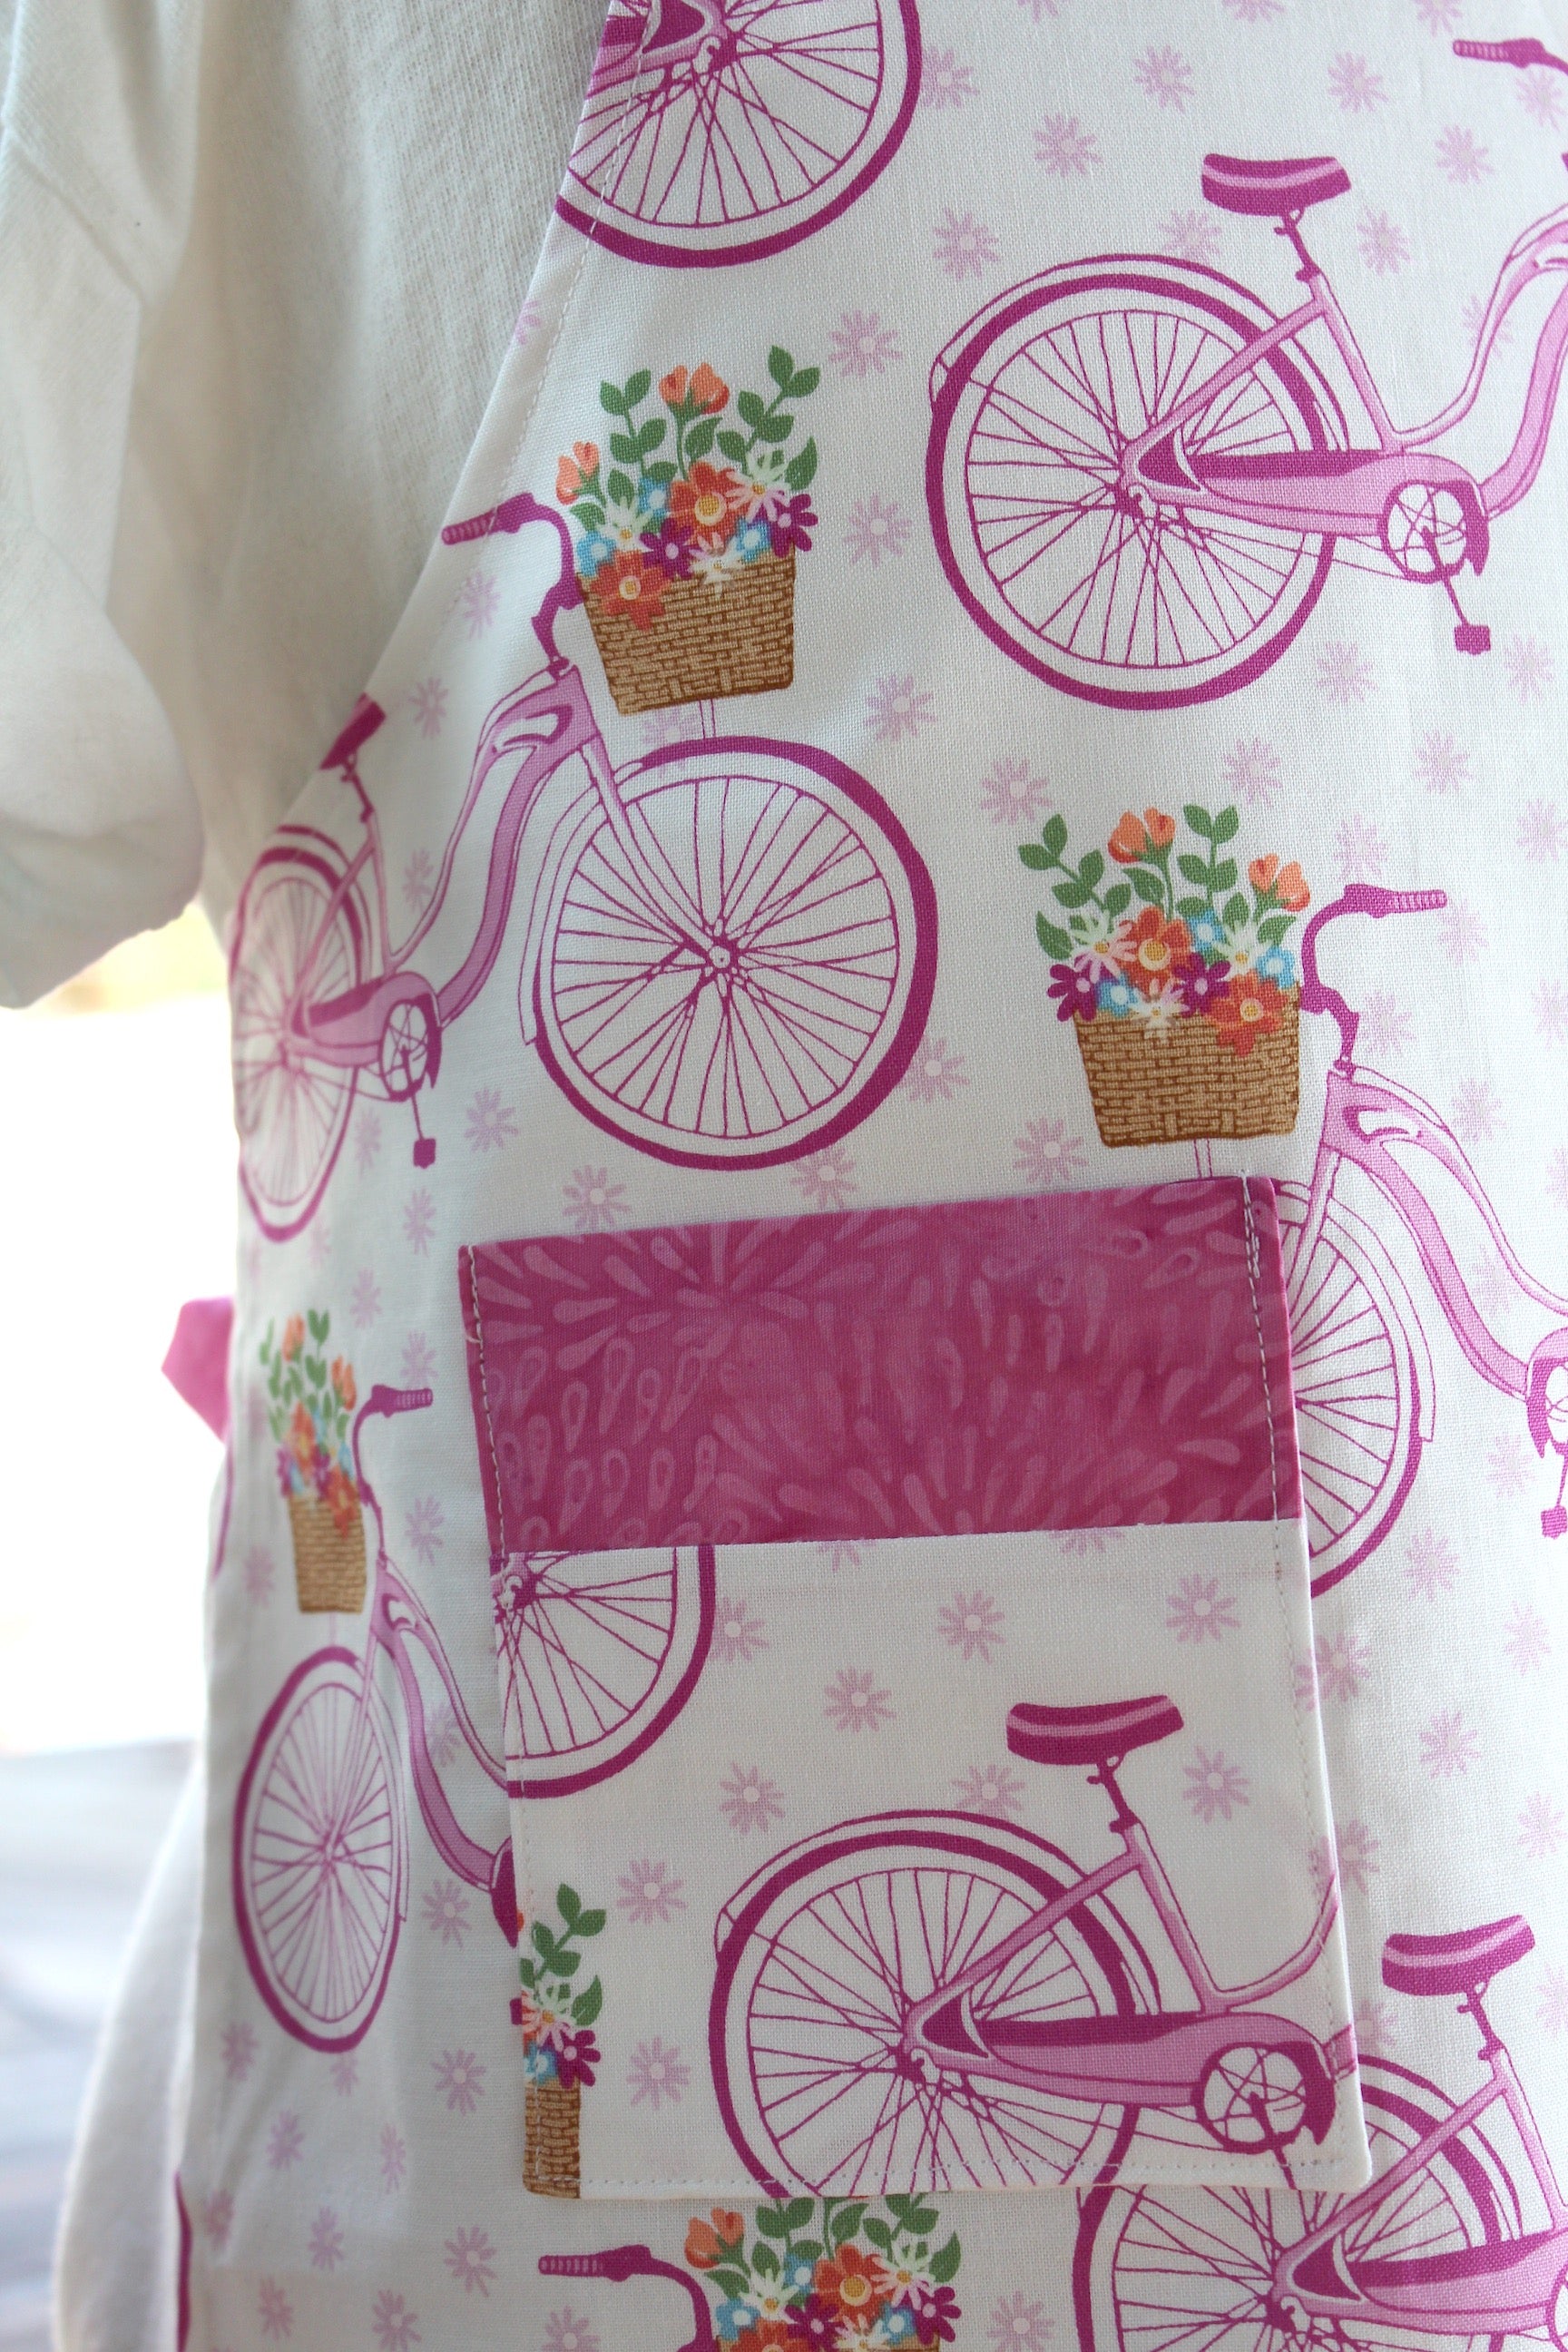 Saturday Morning Kid's Apron-The Blue Peony-Age Group_Kids,Category_Apron,Color_Pink,Department_Kitchen,Gender_Girls,Material_Cotton,Size_Medium (ages 6-11),Size_Small (ages up to 5),Theme_Spring,Theme_Transportation